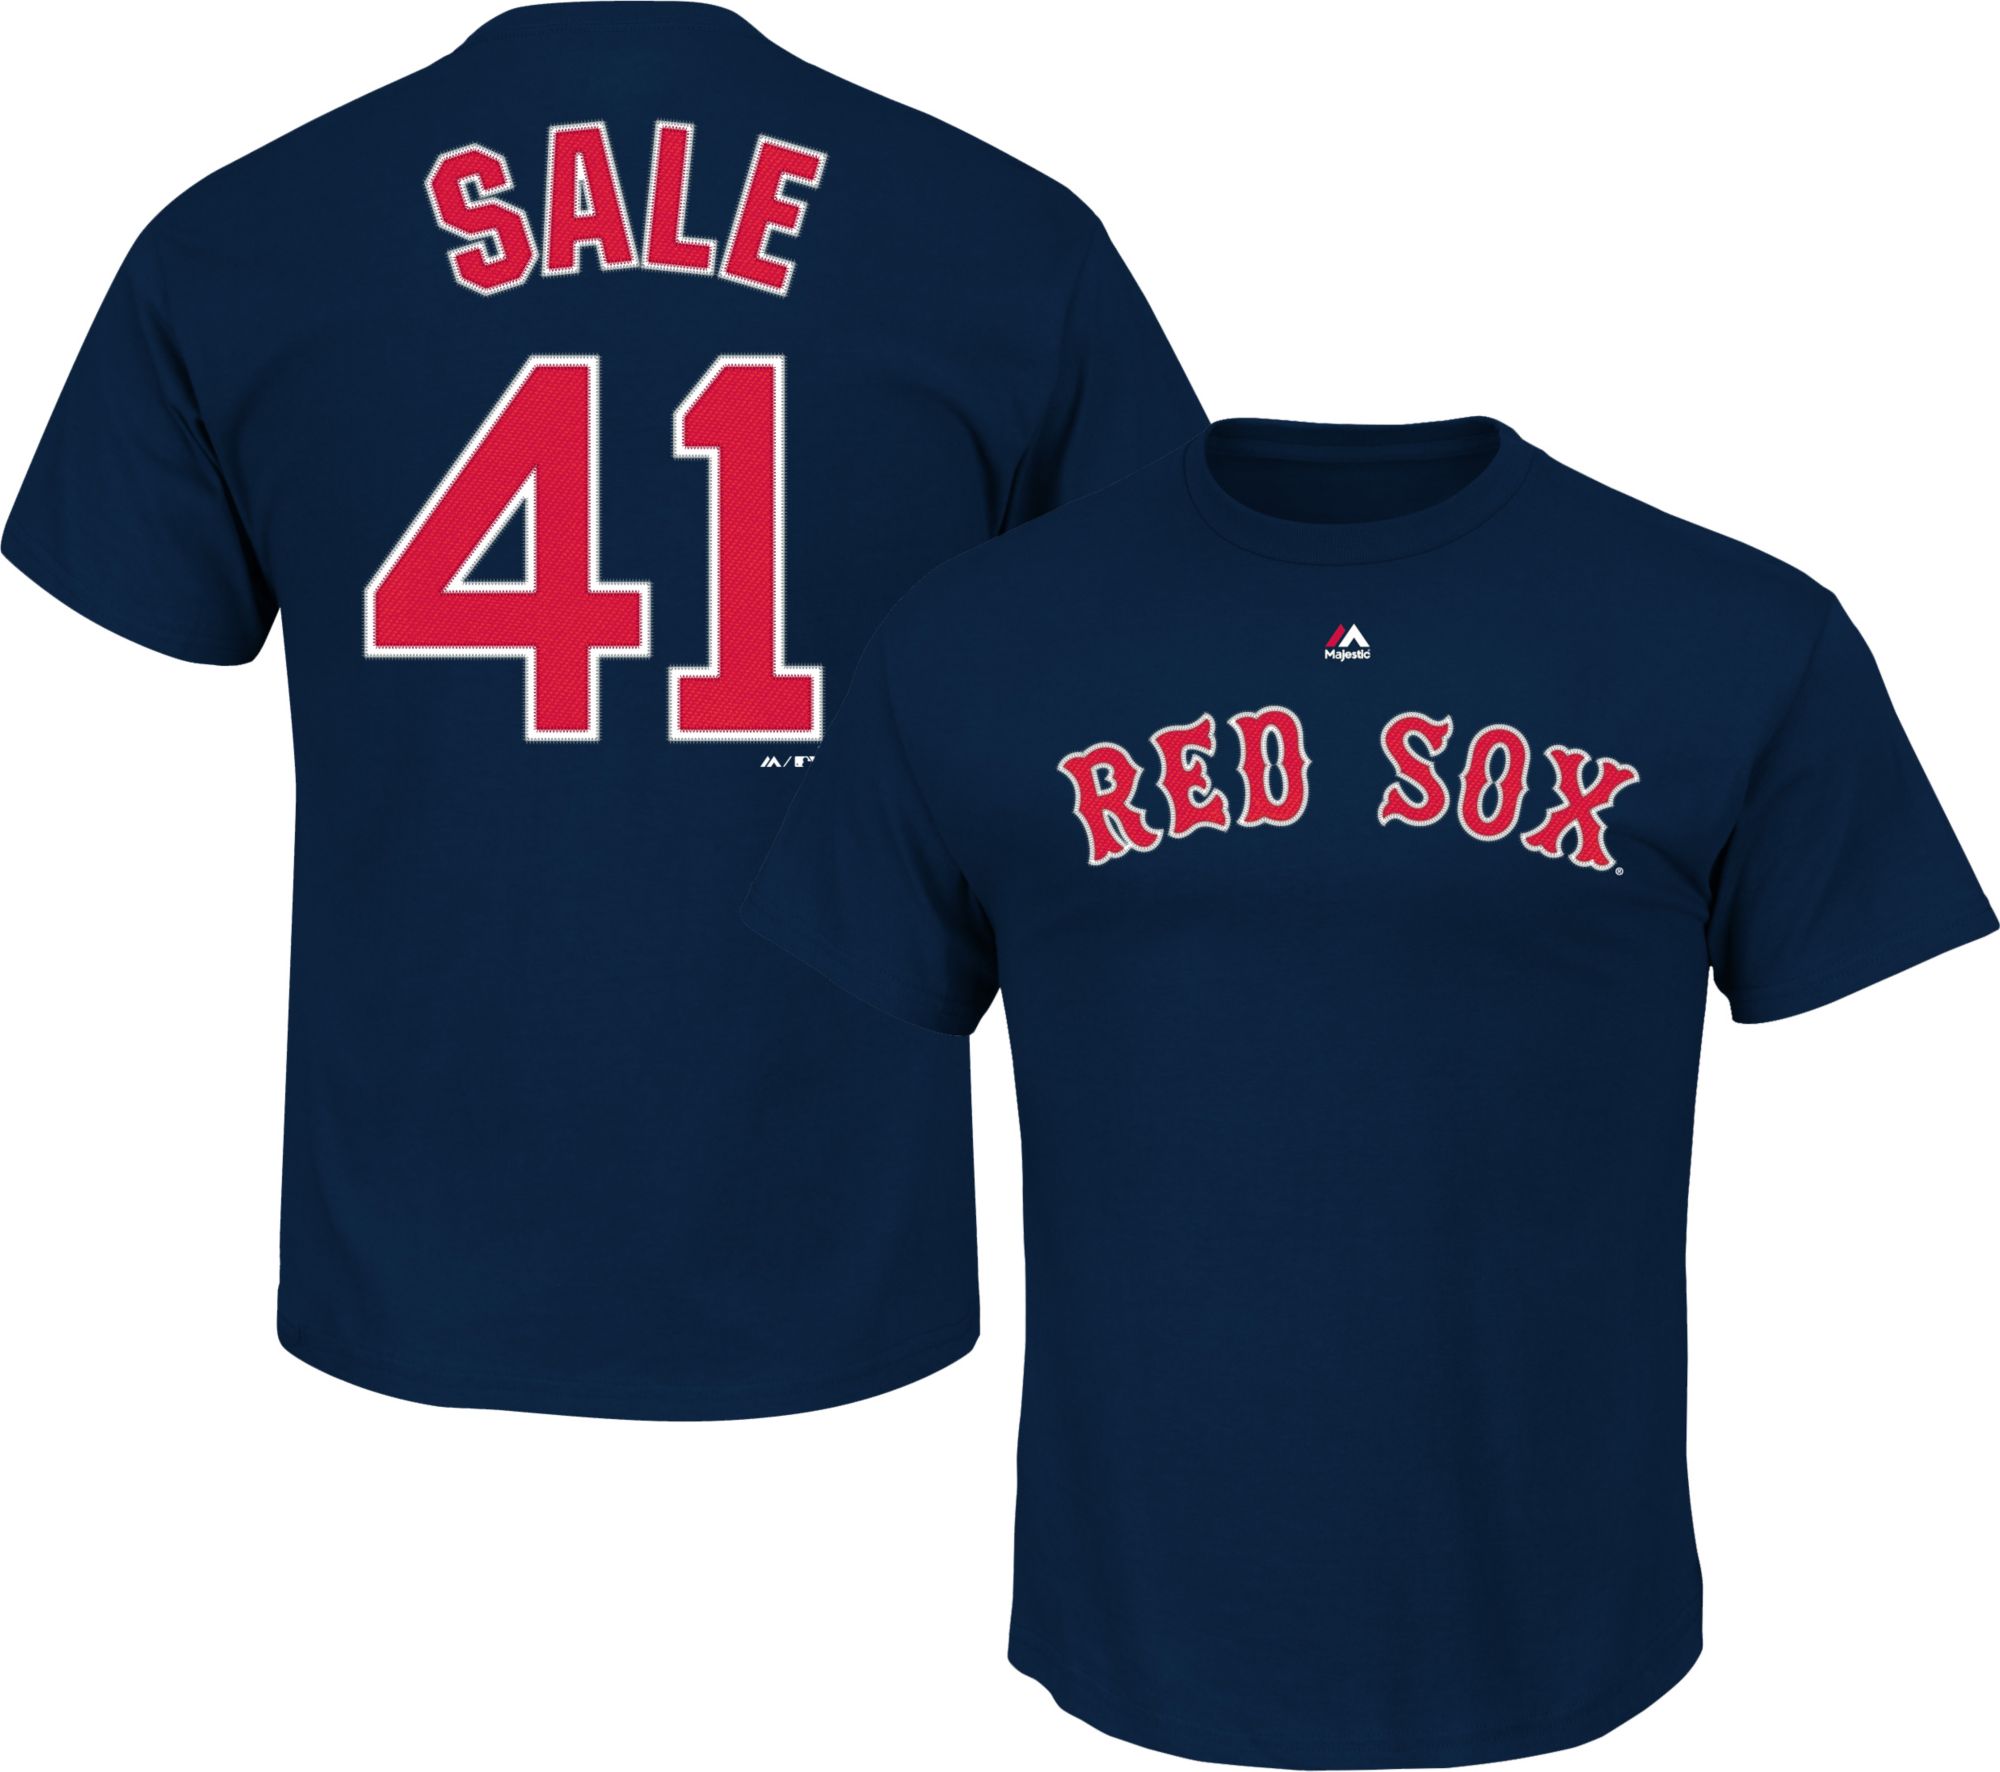 chris sale jersey red sox